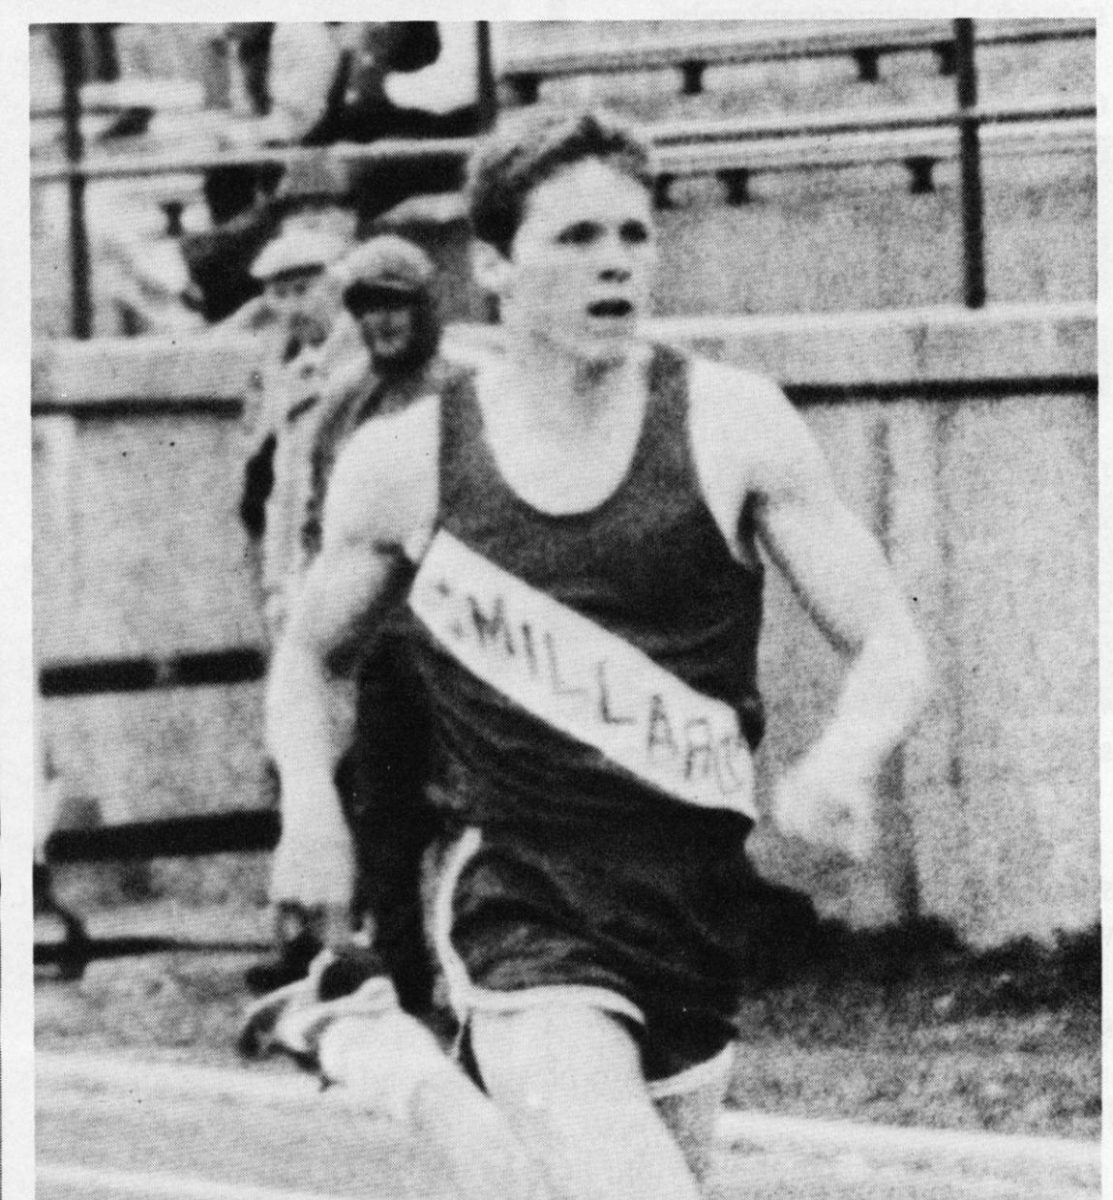 Sprinting toward the finish, senior Jim Sutfin breaks away from the pack for a spectacular performance. Sutfin was a double gold medal winner at State. Photo by Michelle Longa. Photo and caption from 1985 MSHS yearbook.